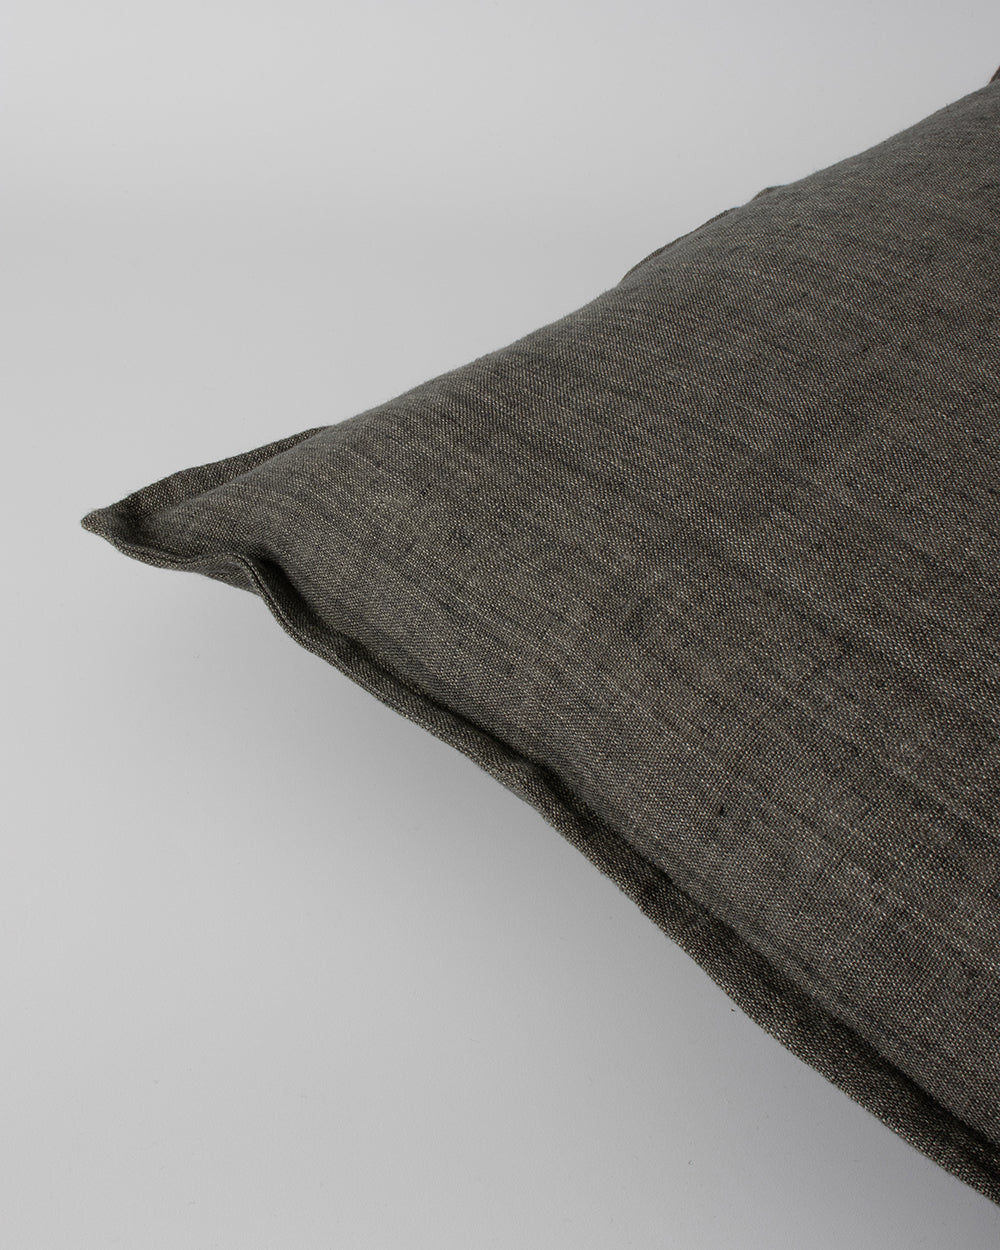 Cassia Linen Cushion with Feather Inner - Nori